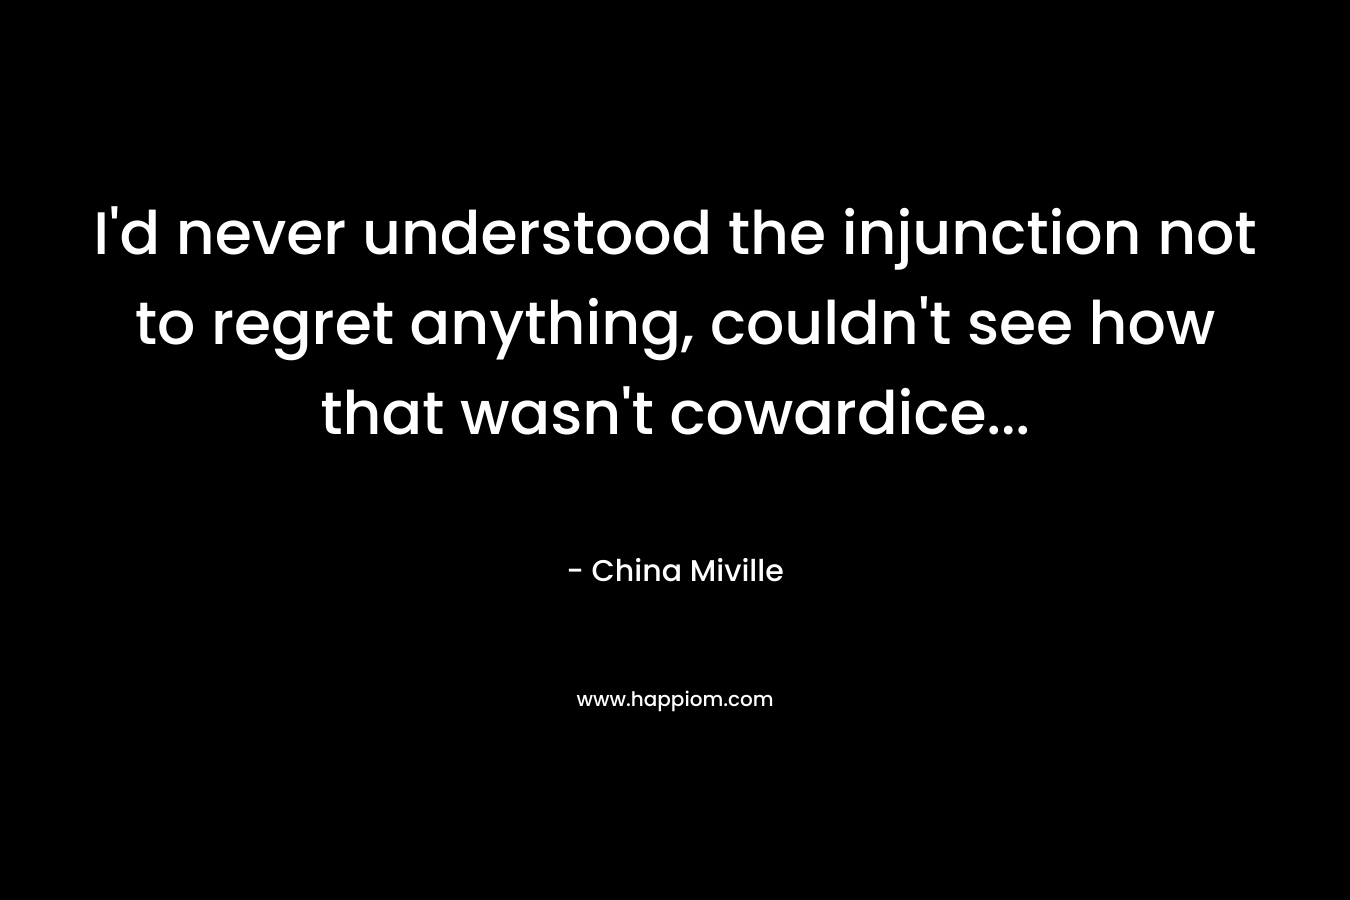 I’d never understood the injunction not to regret anything, couldn’t see how that wasn’t cowardice… – China Miville